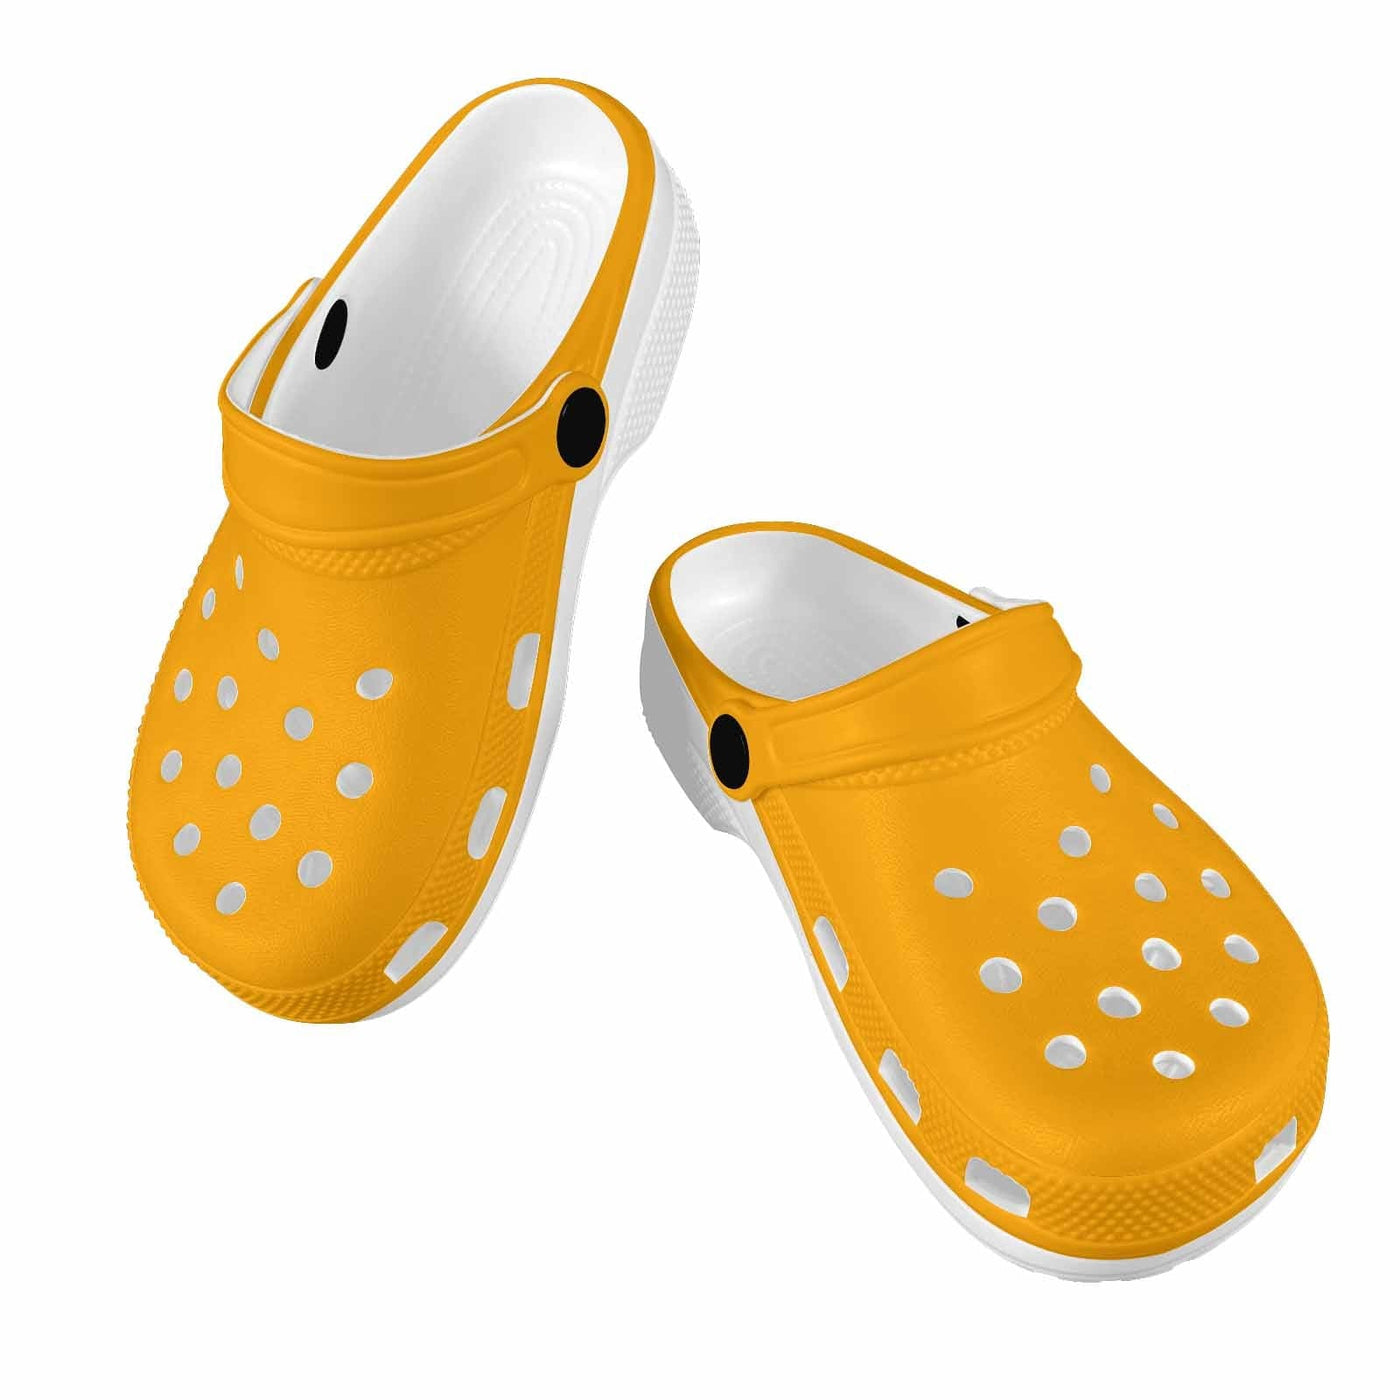 Bright Orange Clogs For Youth - Unisex | Clogs | Youth